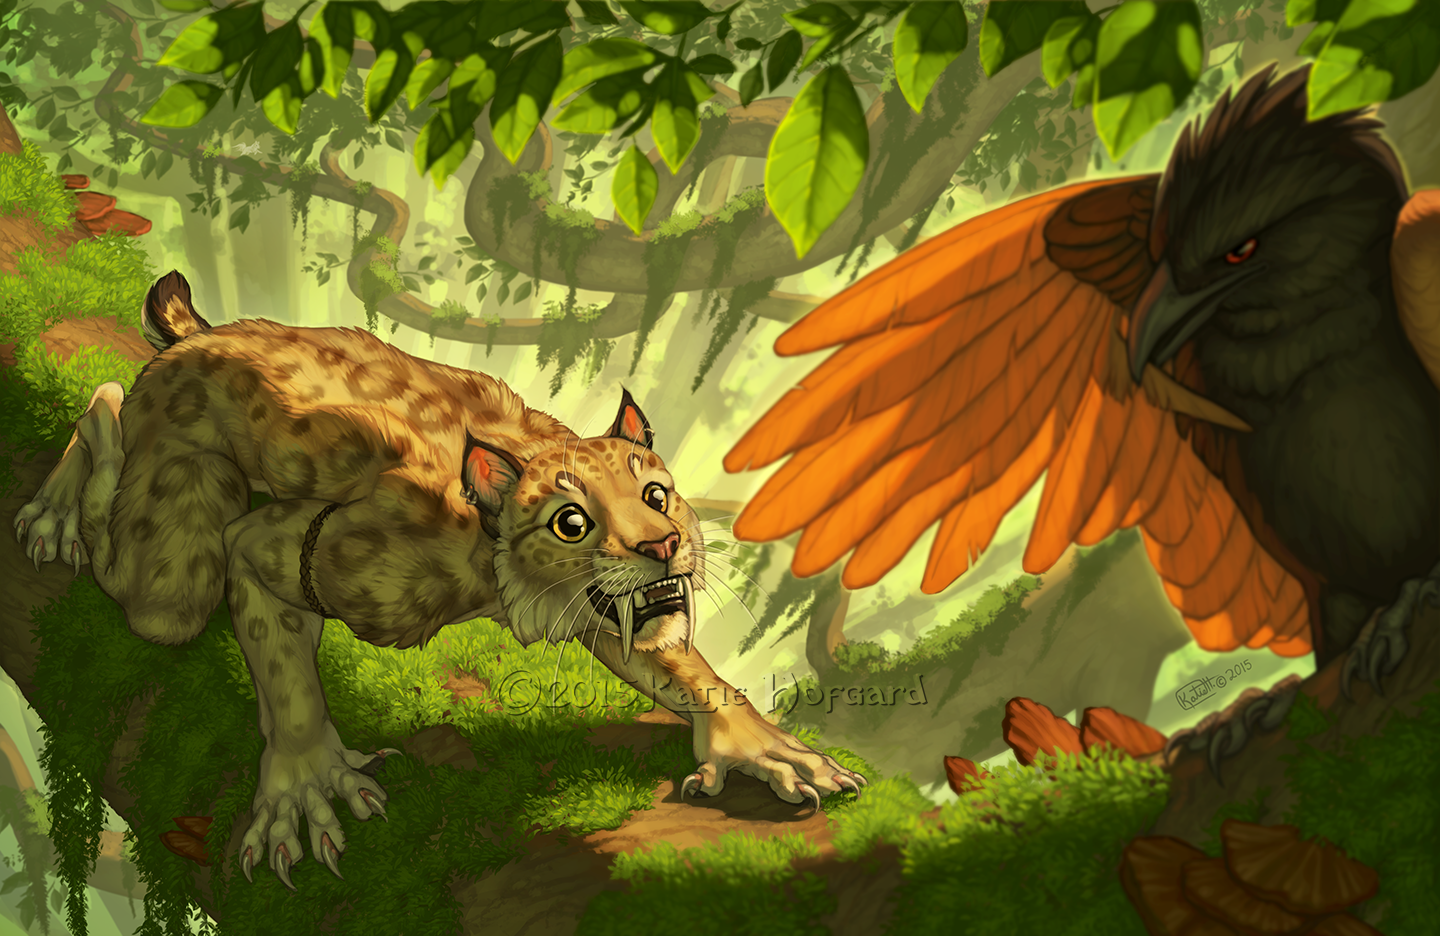 General 1440x936 furry Anthro animals fantasy art digital art 2015 (Year) watermarked nature leaves claws birds leopard sunlight